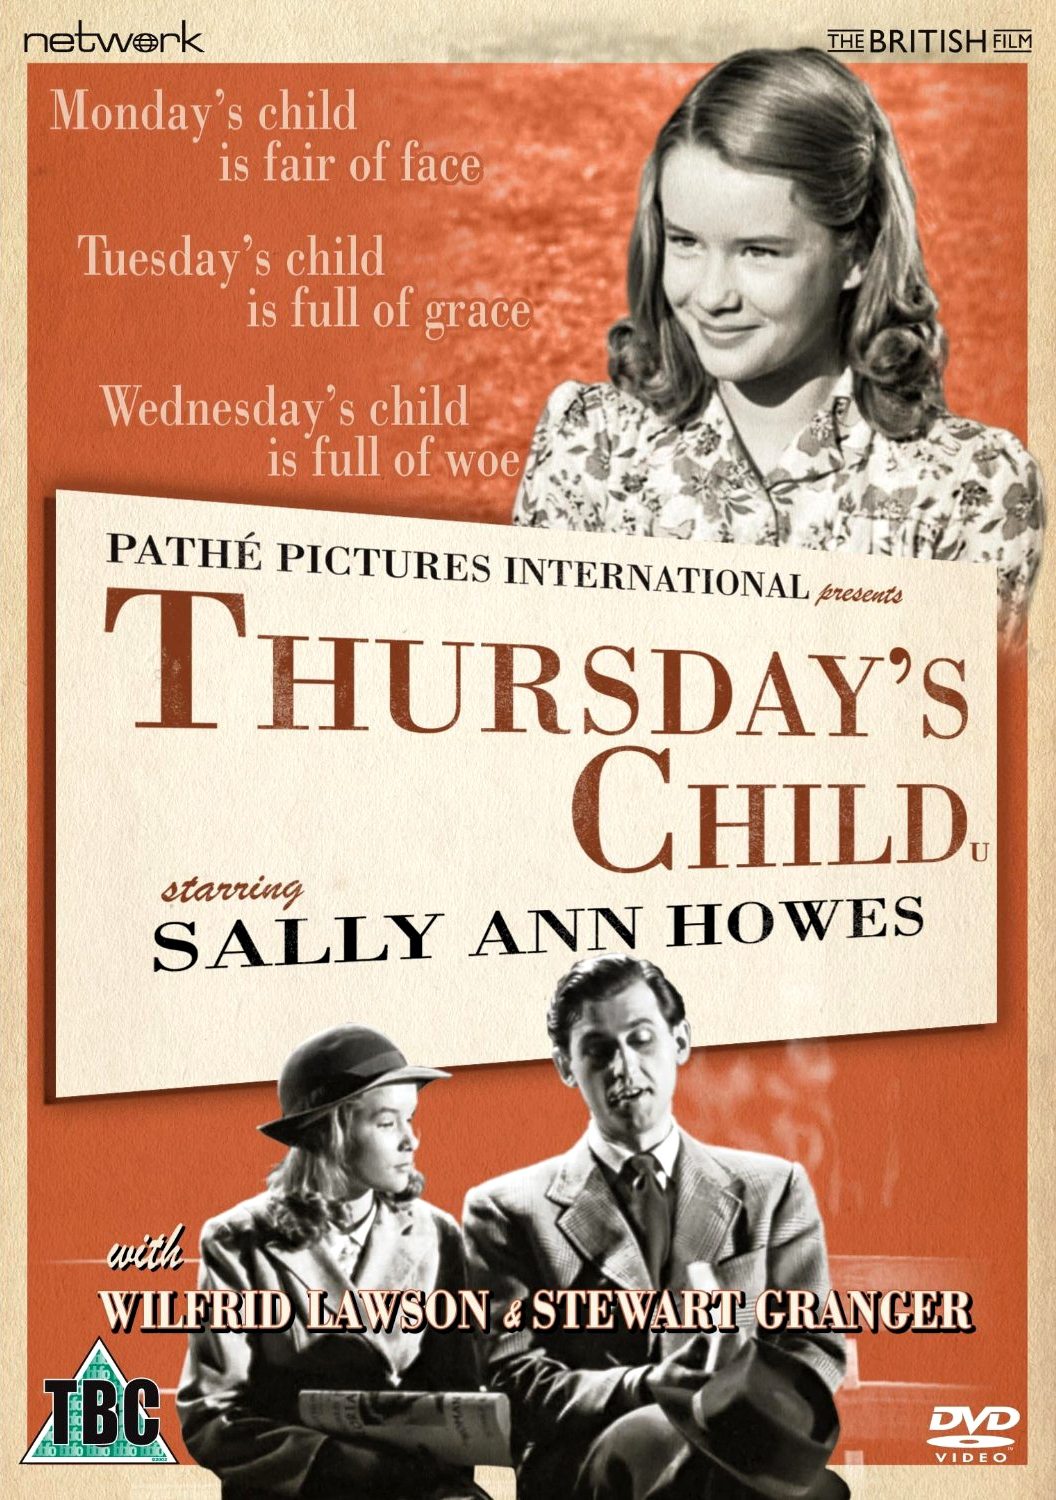 Thursday’s Child DVD from Network and The British Film